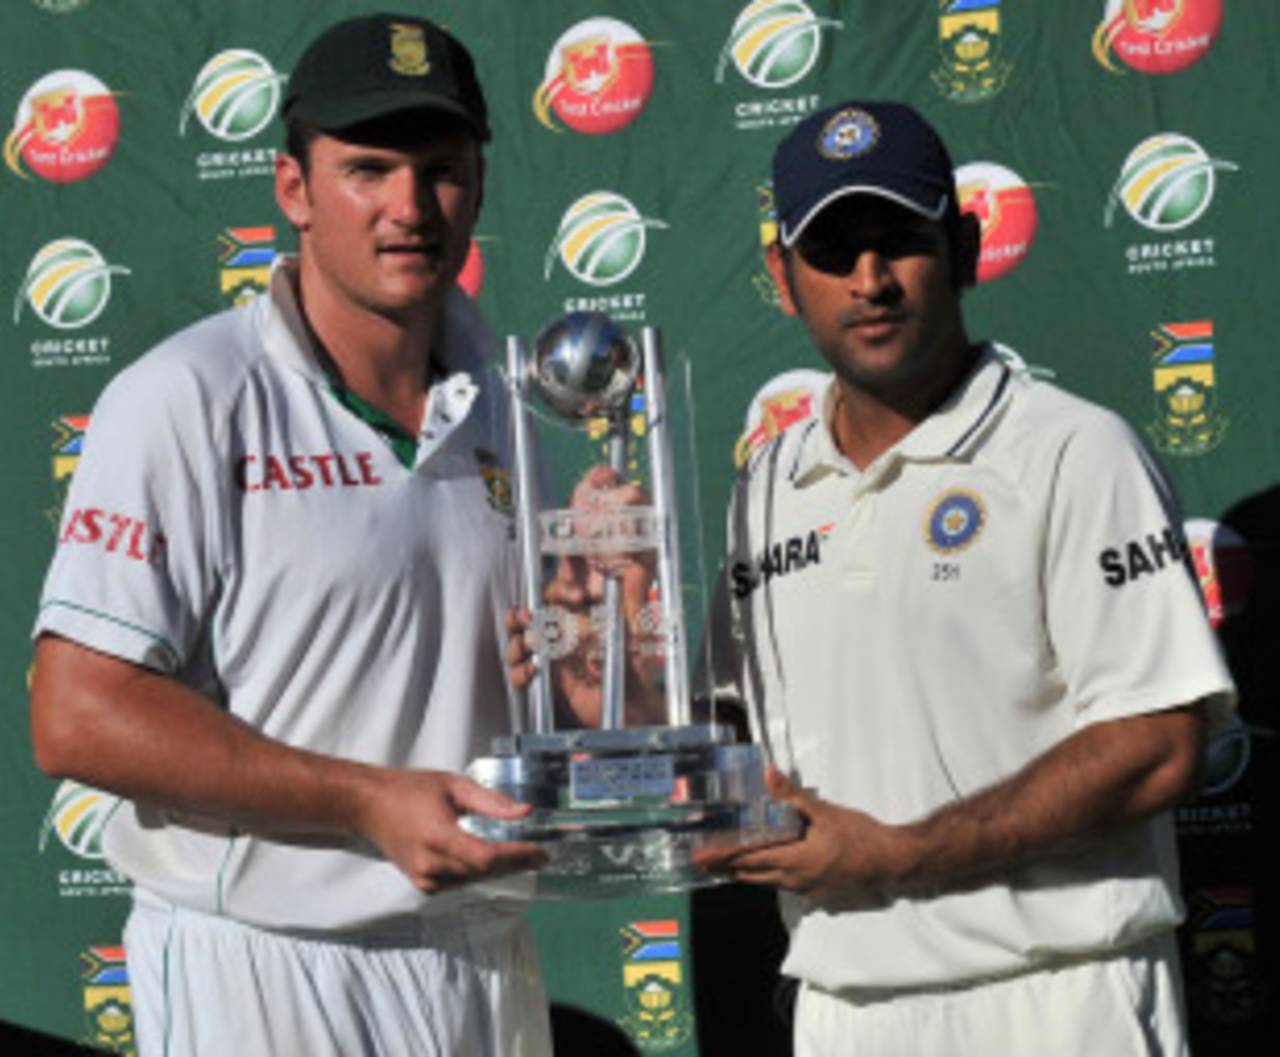 Graeme Smith and MS Dhoni share the trophy after India drew their Test series in South Africa 1-1, South Africa v India, 3rd Test, Cape Town, 5th day, January 6, 2011